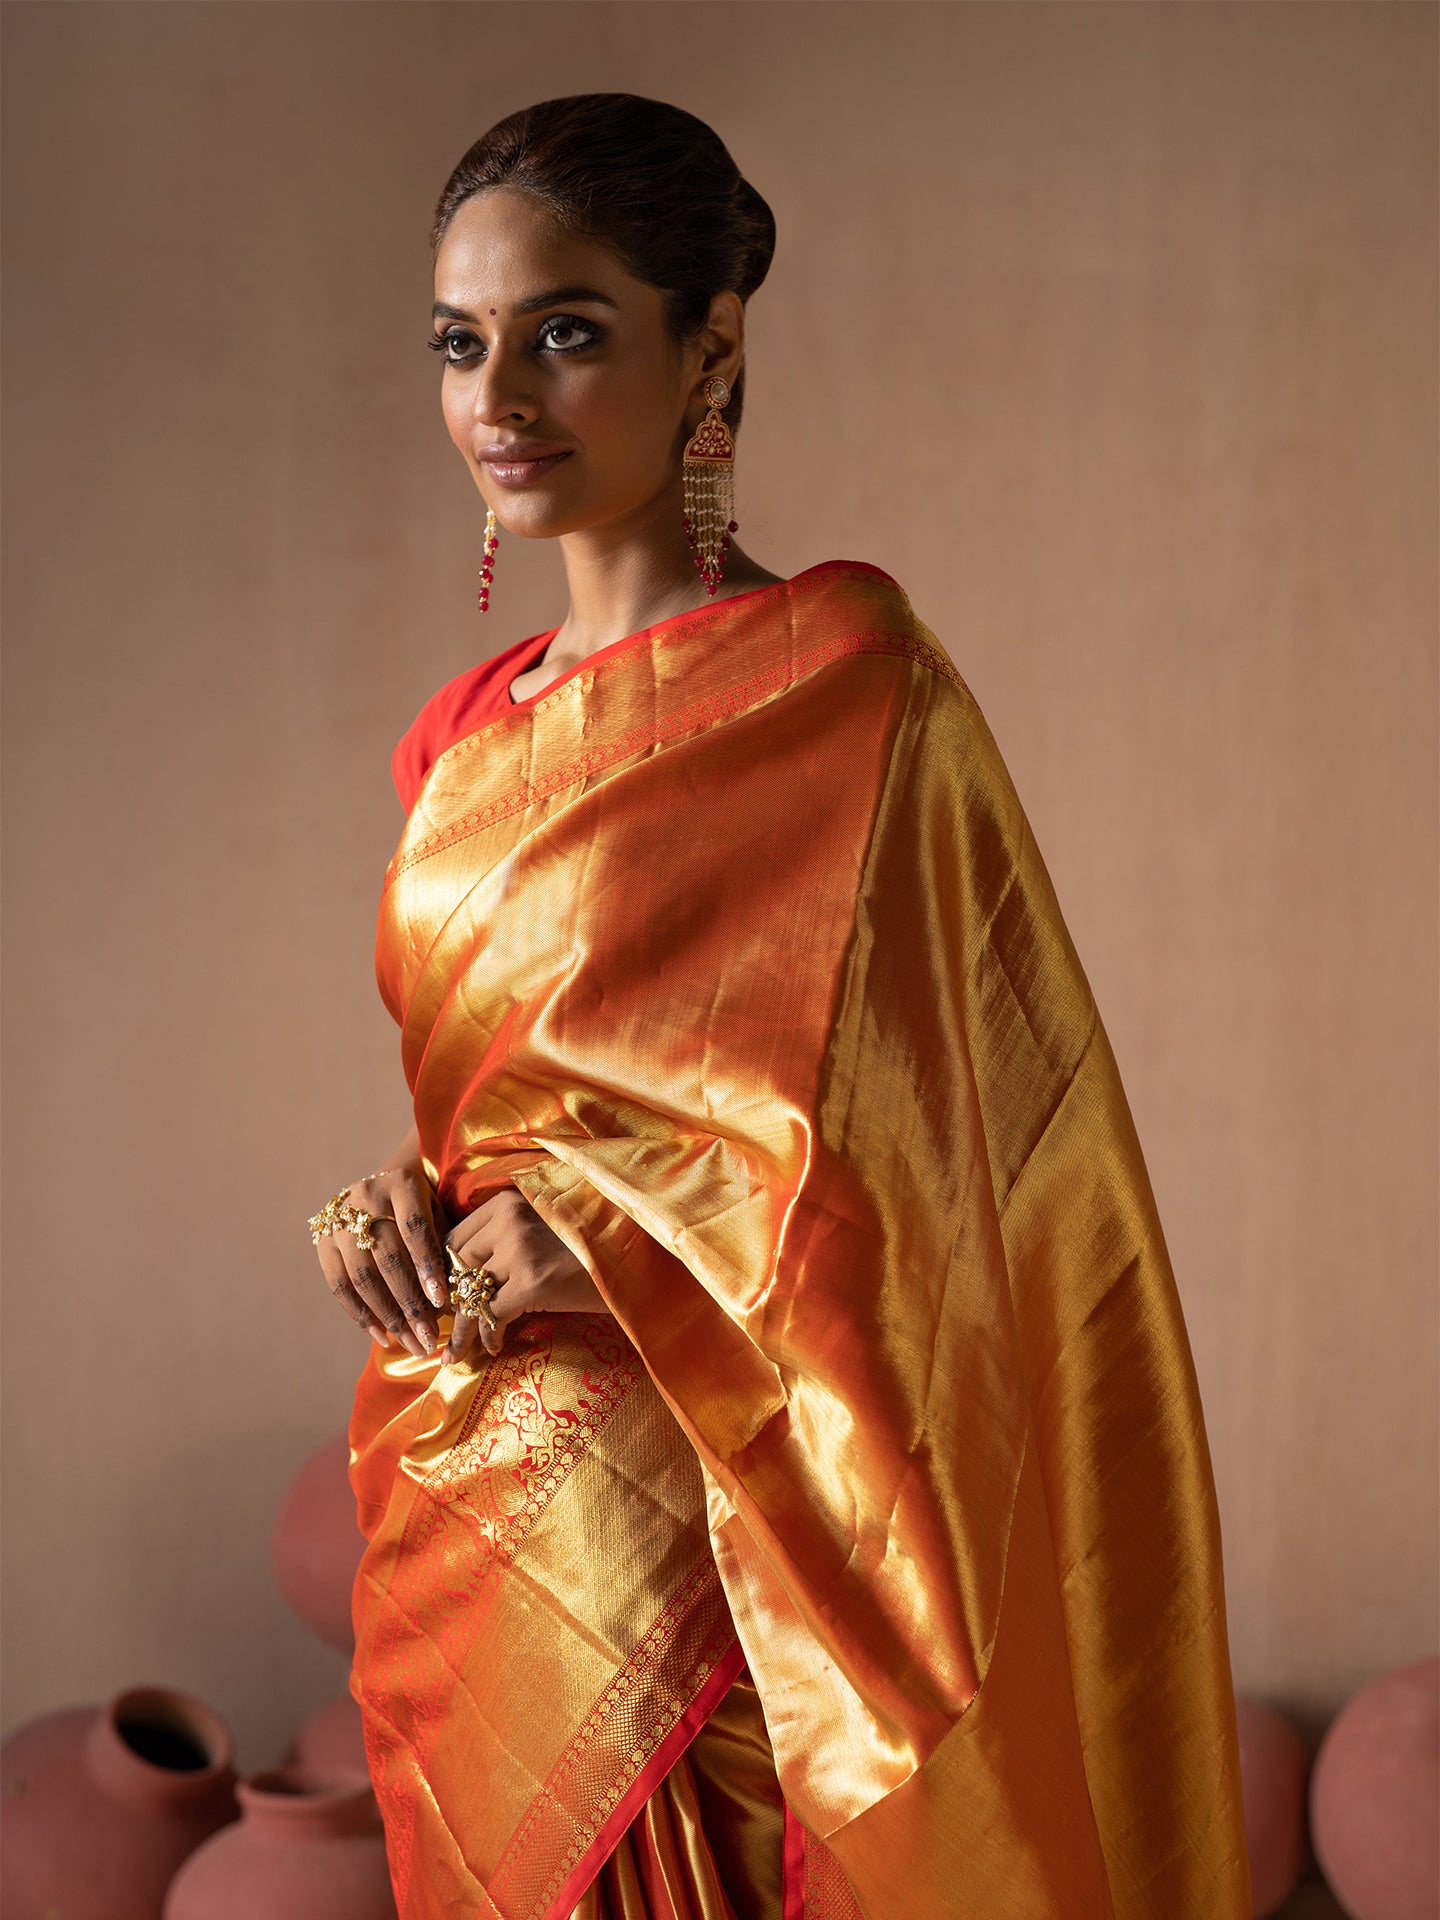 Best Saree Collection for Women in India - Malhotra's Indian Heritage